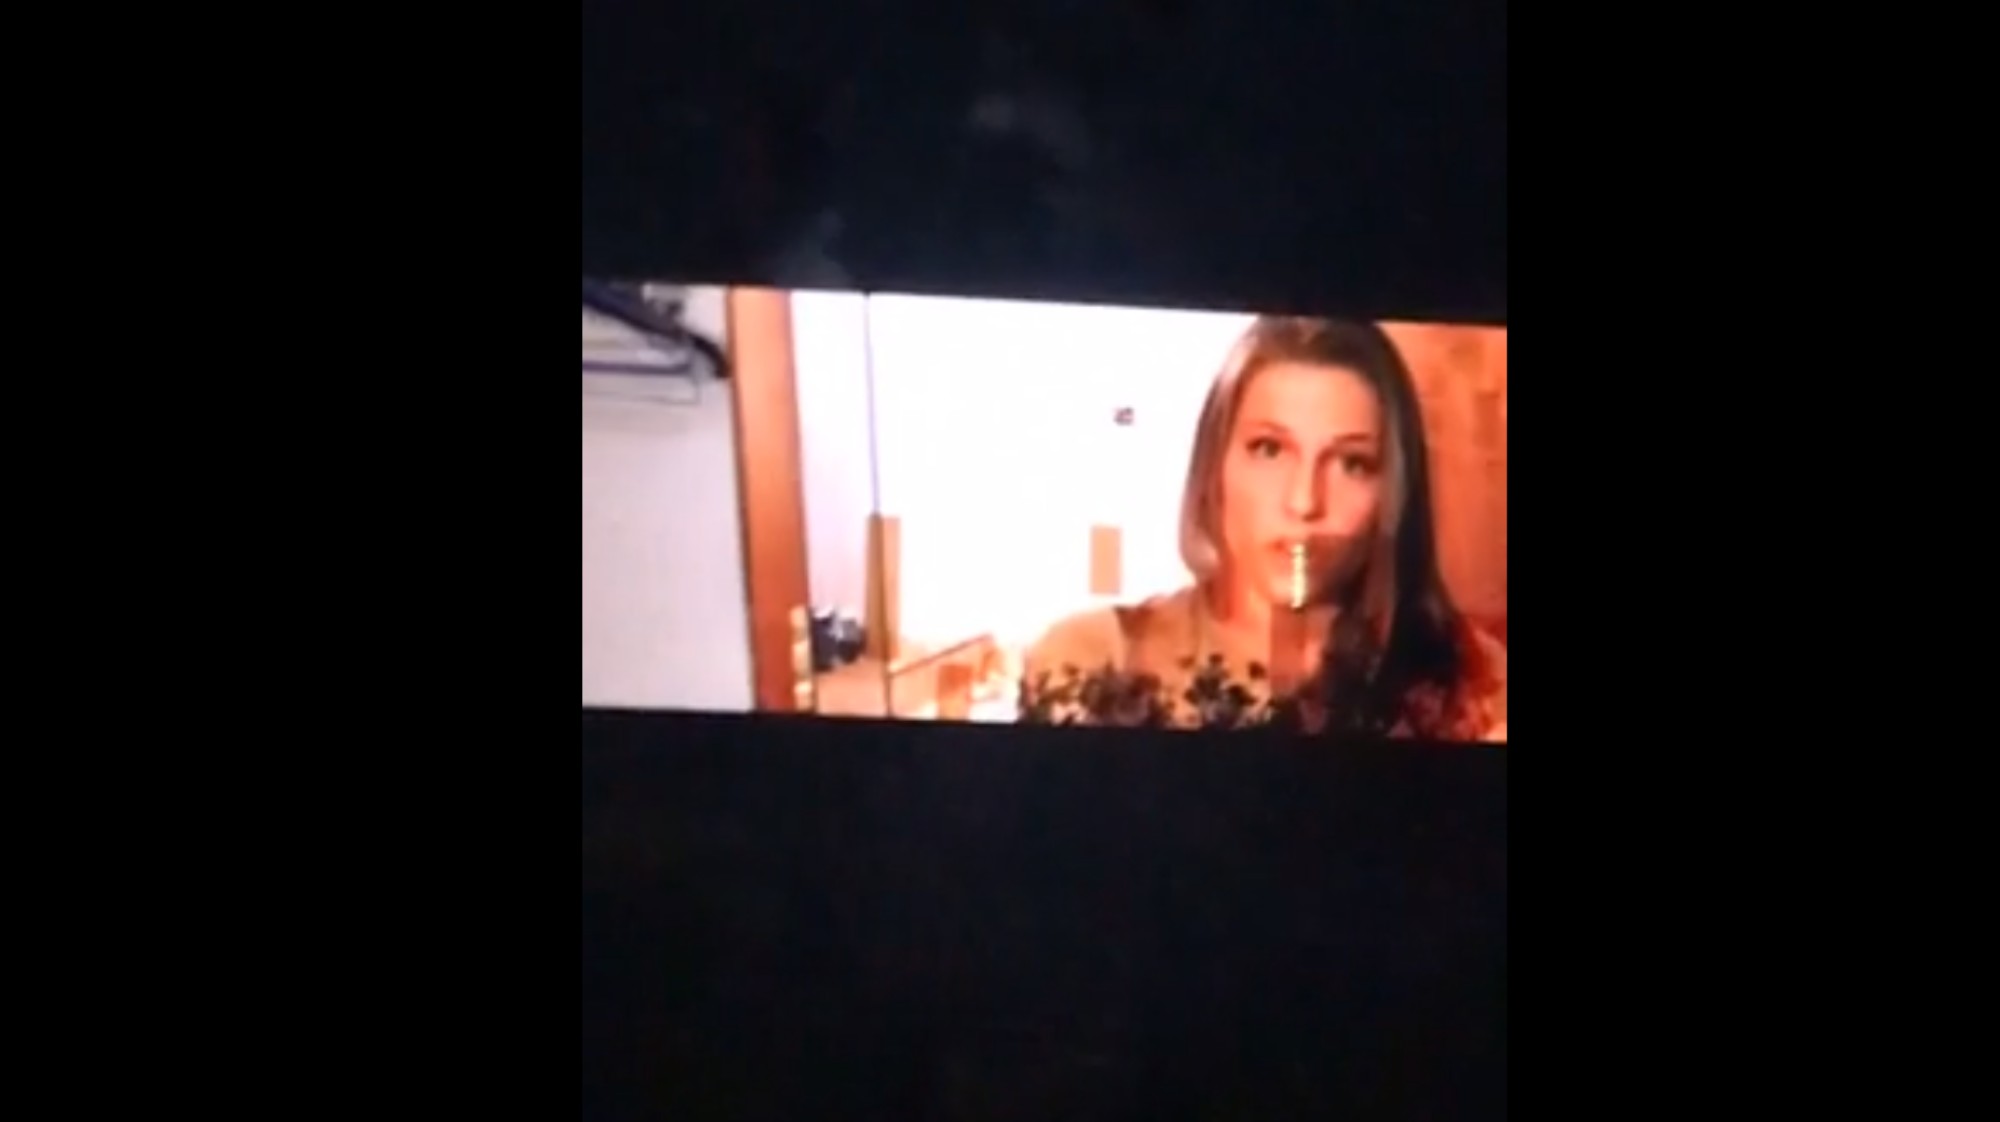 Blowjob While Watching Porn - Threesome Blowjob Scene on Giant Highway Billboard Could ...